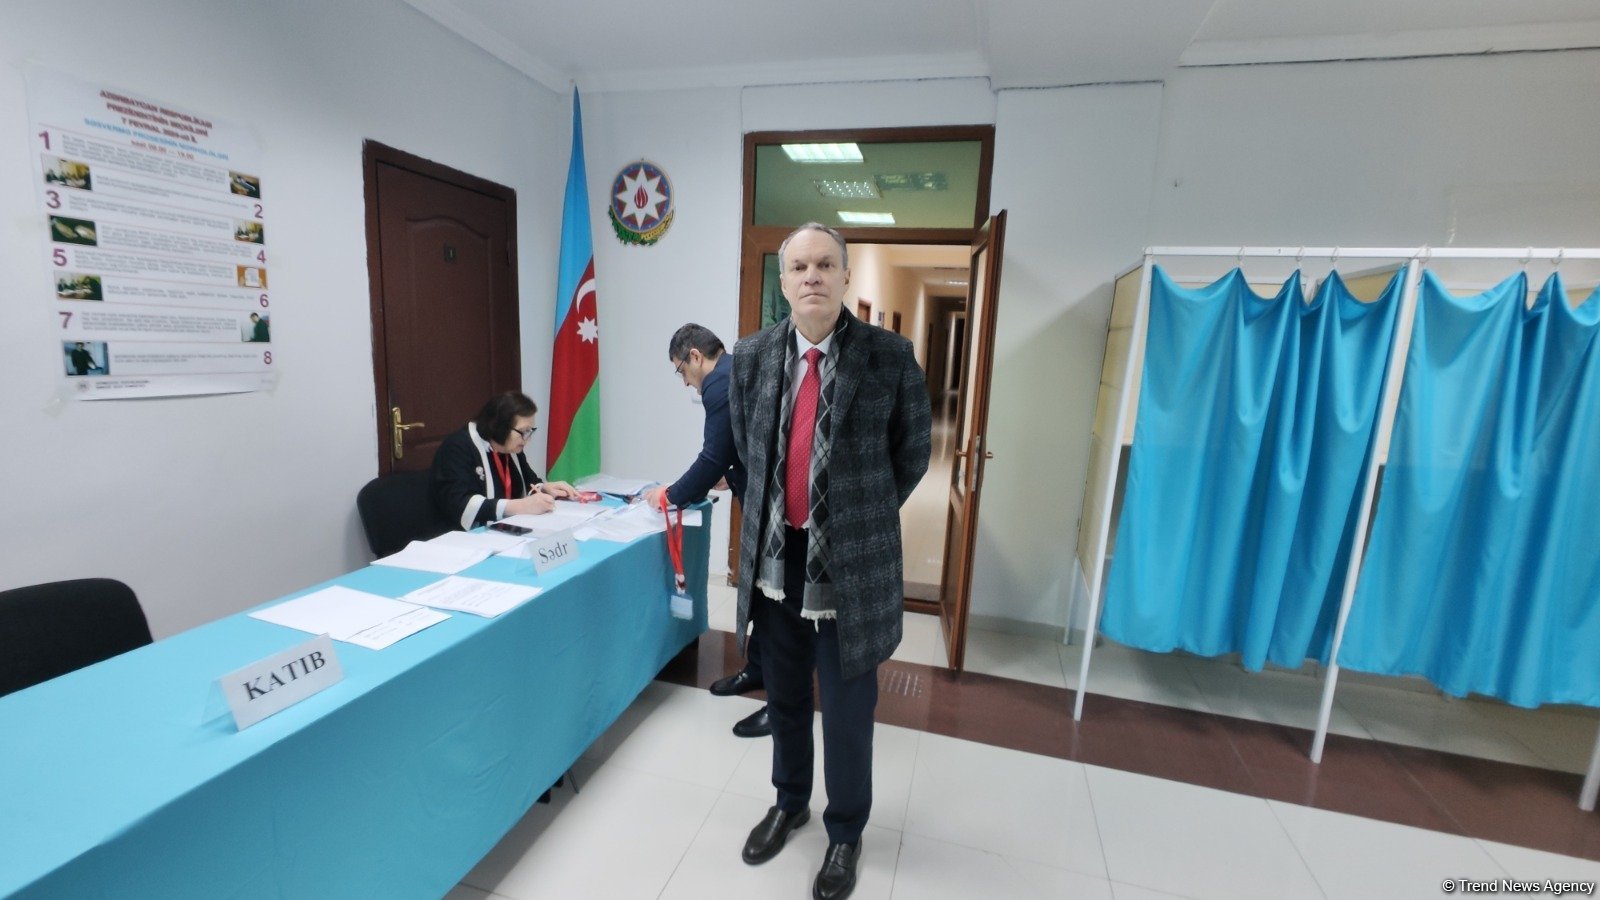 Azerbaijan shows high level of responsibility at polling stations - Russian observer